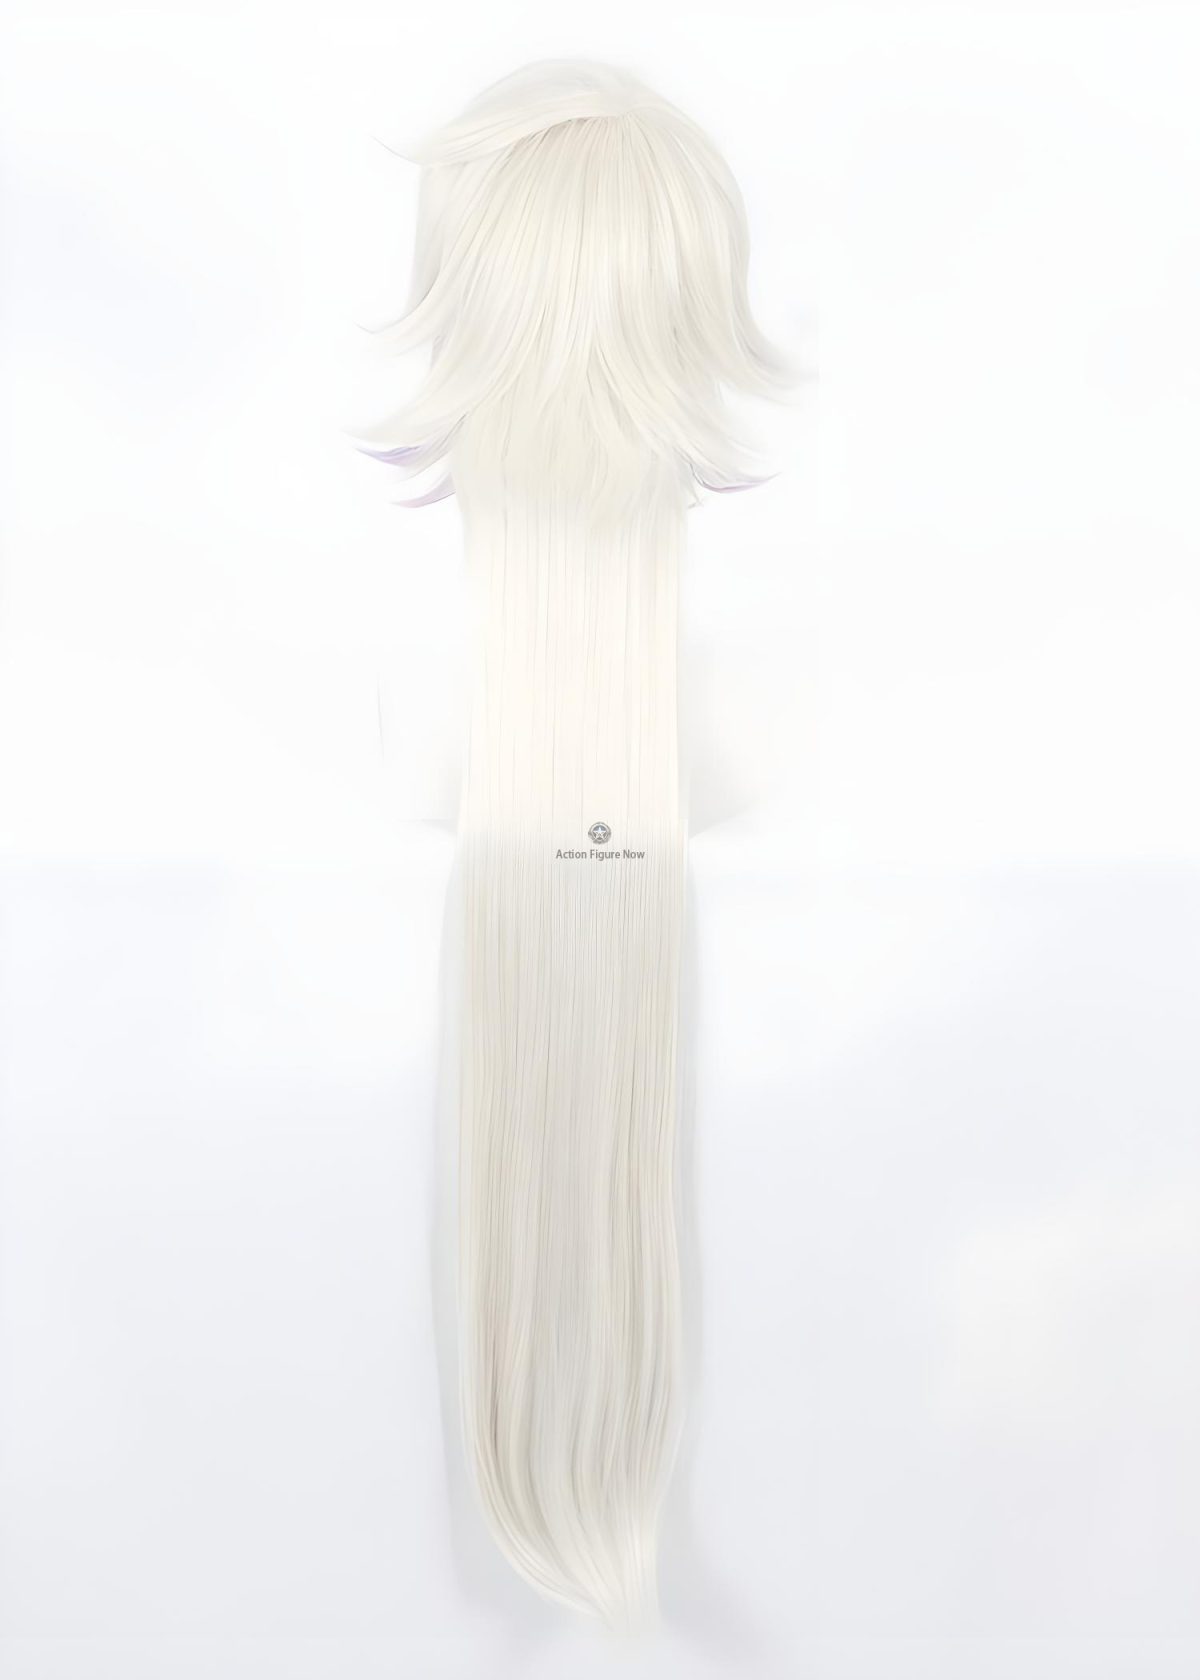 Merlin Cosplay Wig from Fate/Grand Order